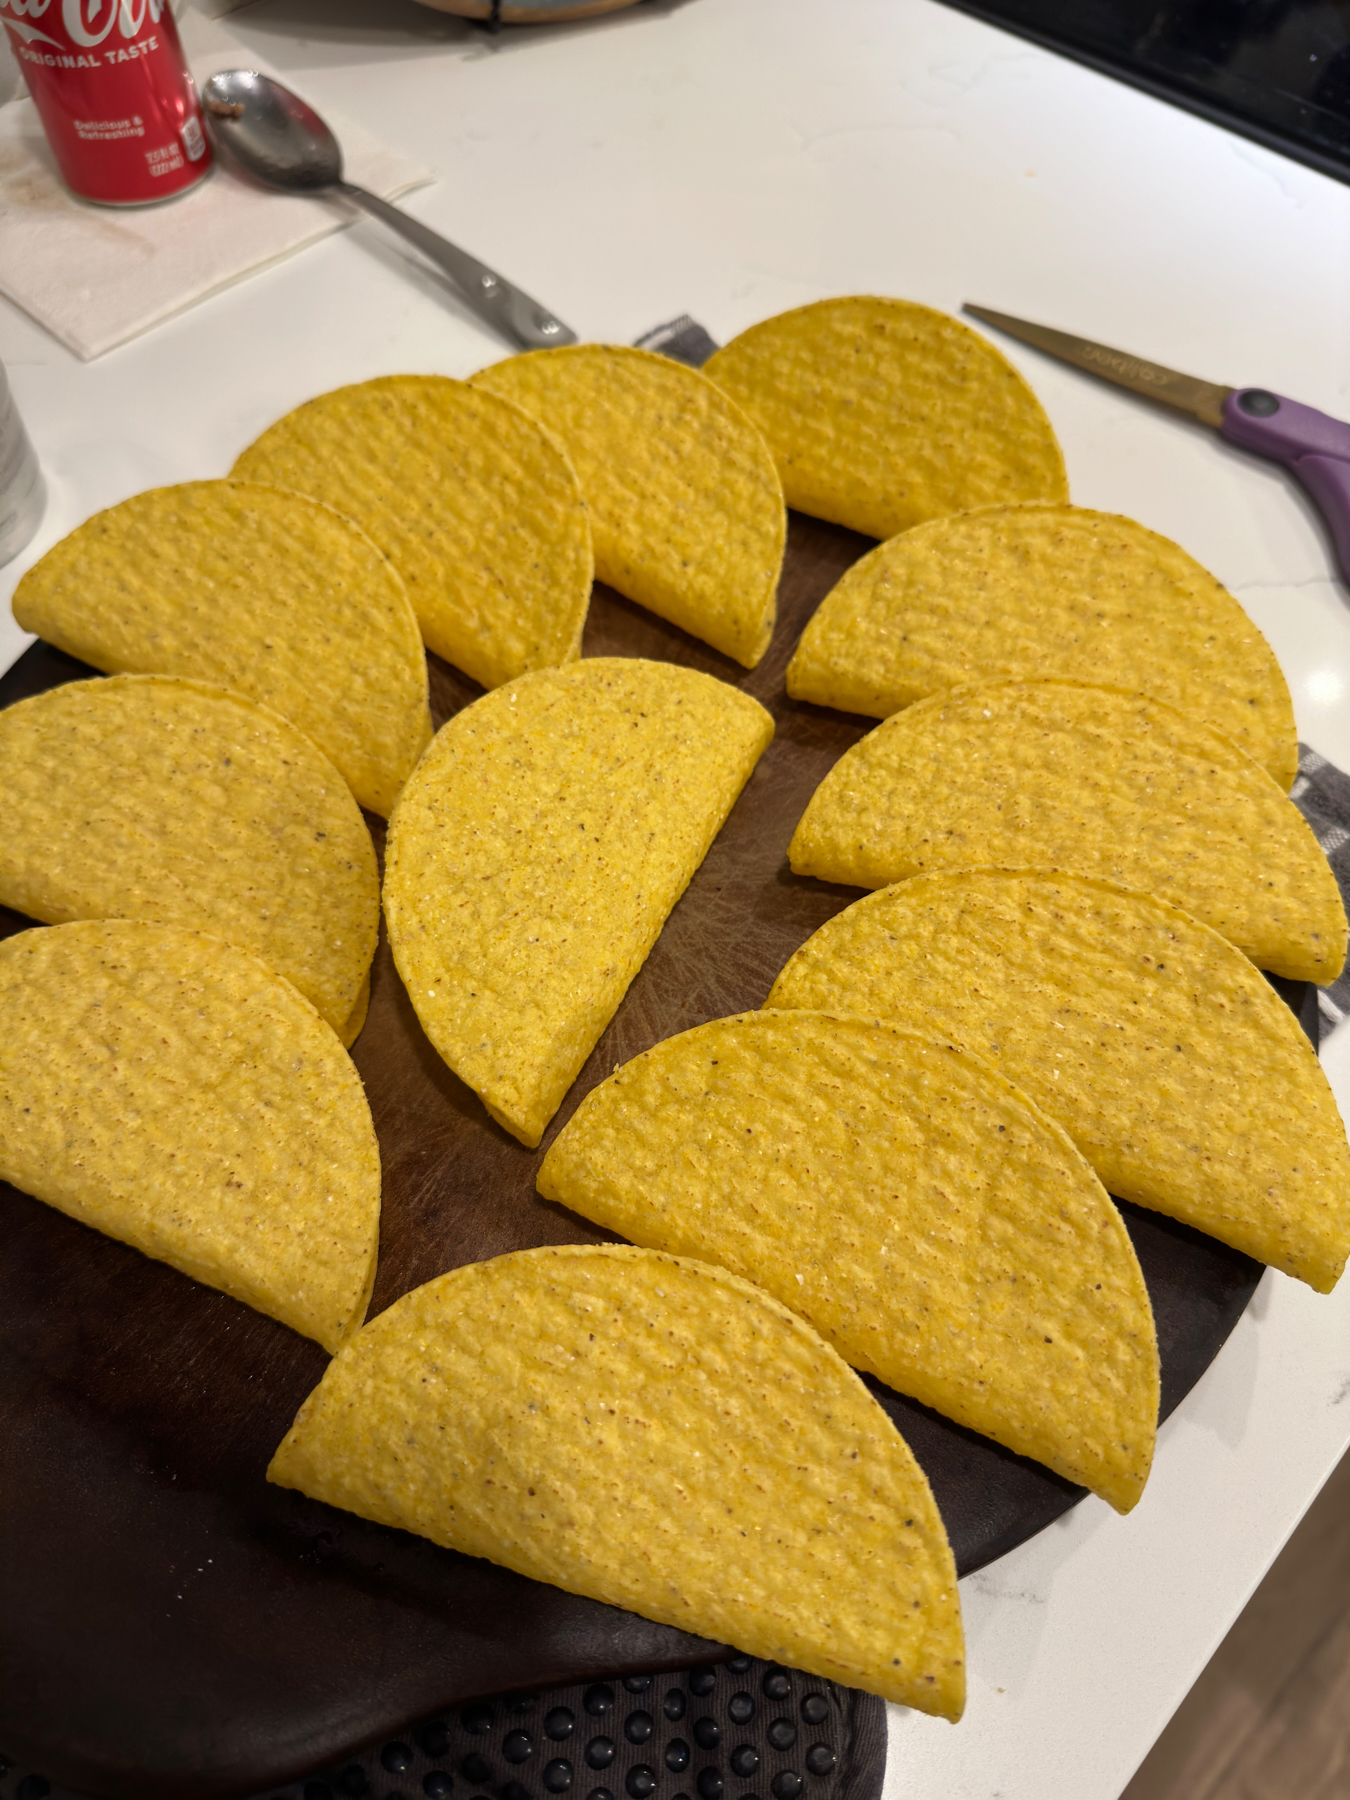 A collection of taco shells spread out on a cutting board with a Coca-Cola can and utensils in the background.